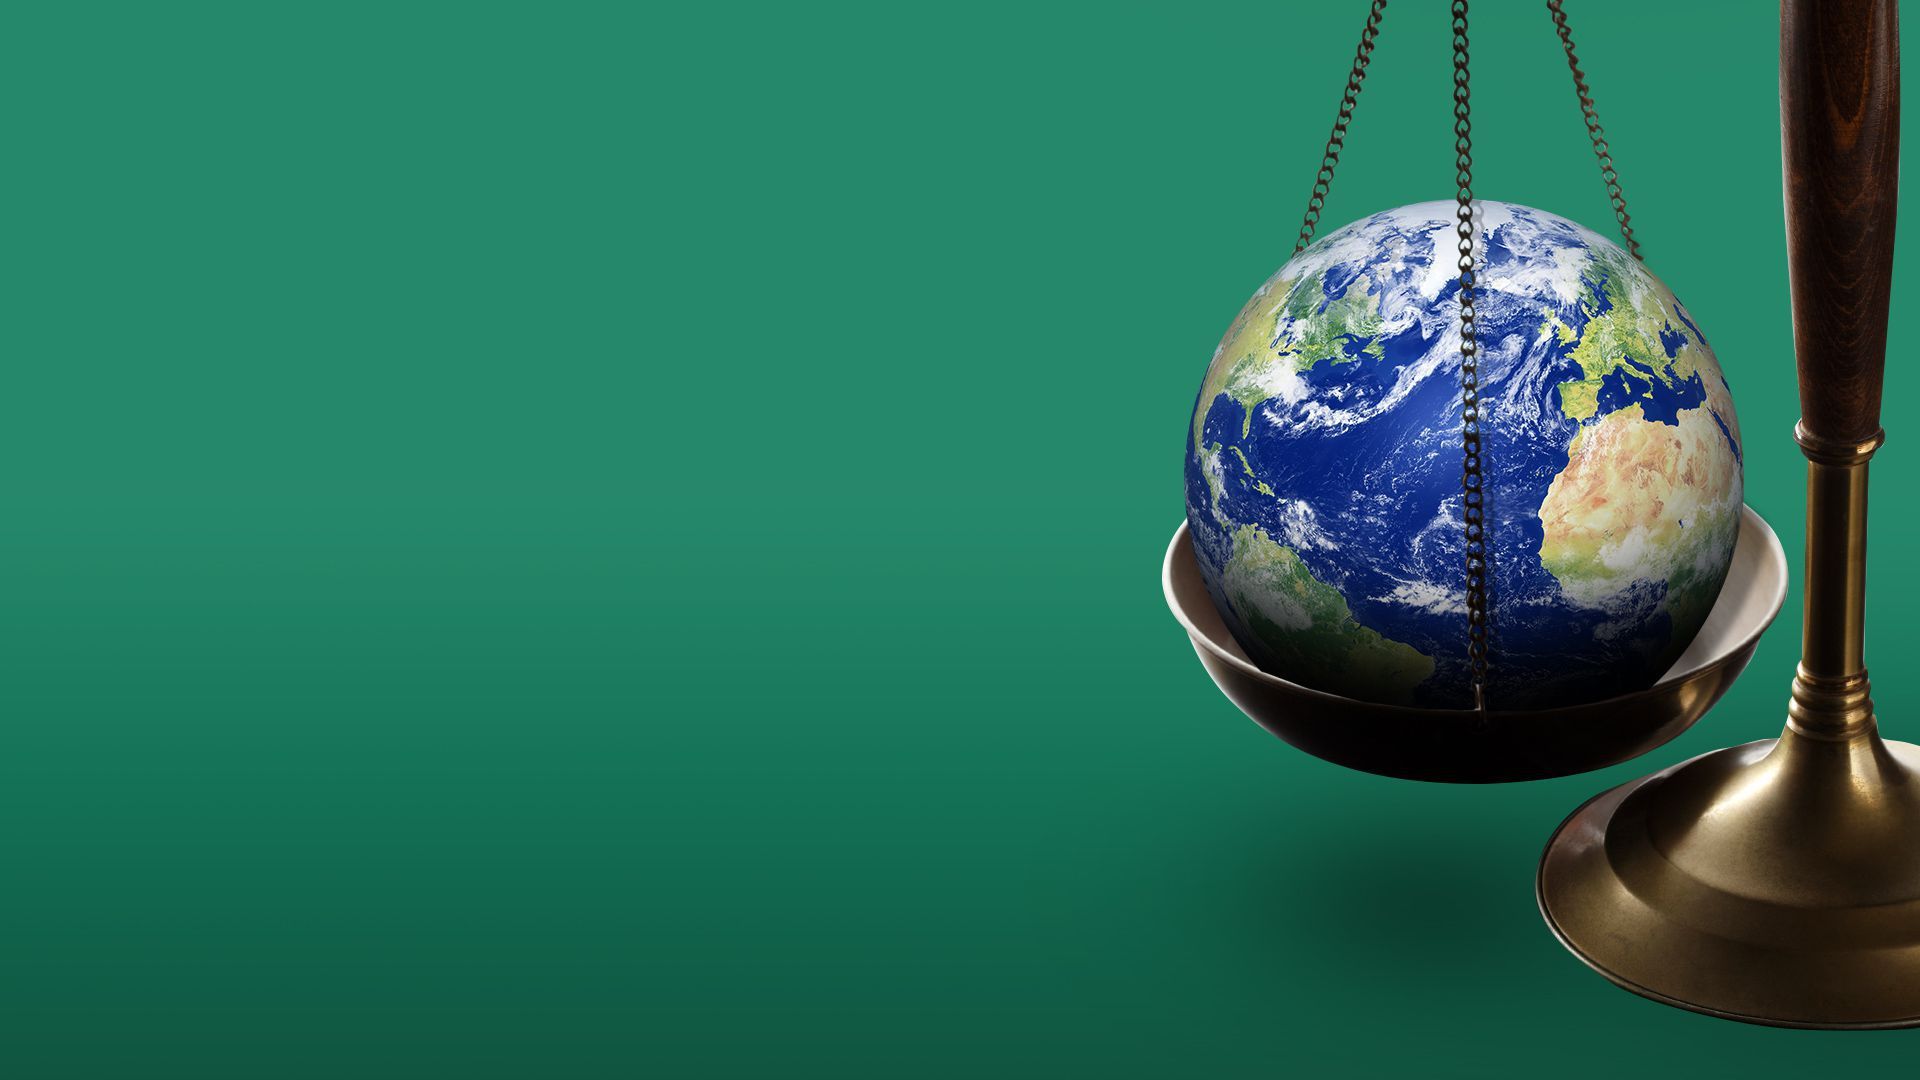 Illustration of the Earth inside of a balance scale.